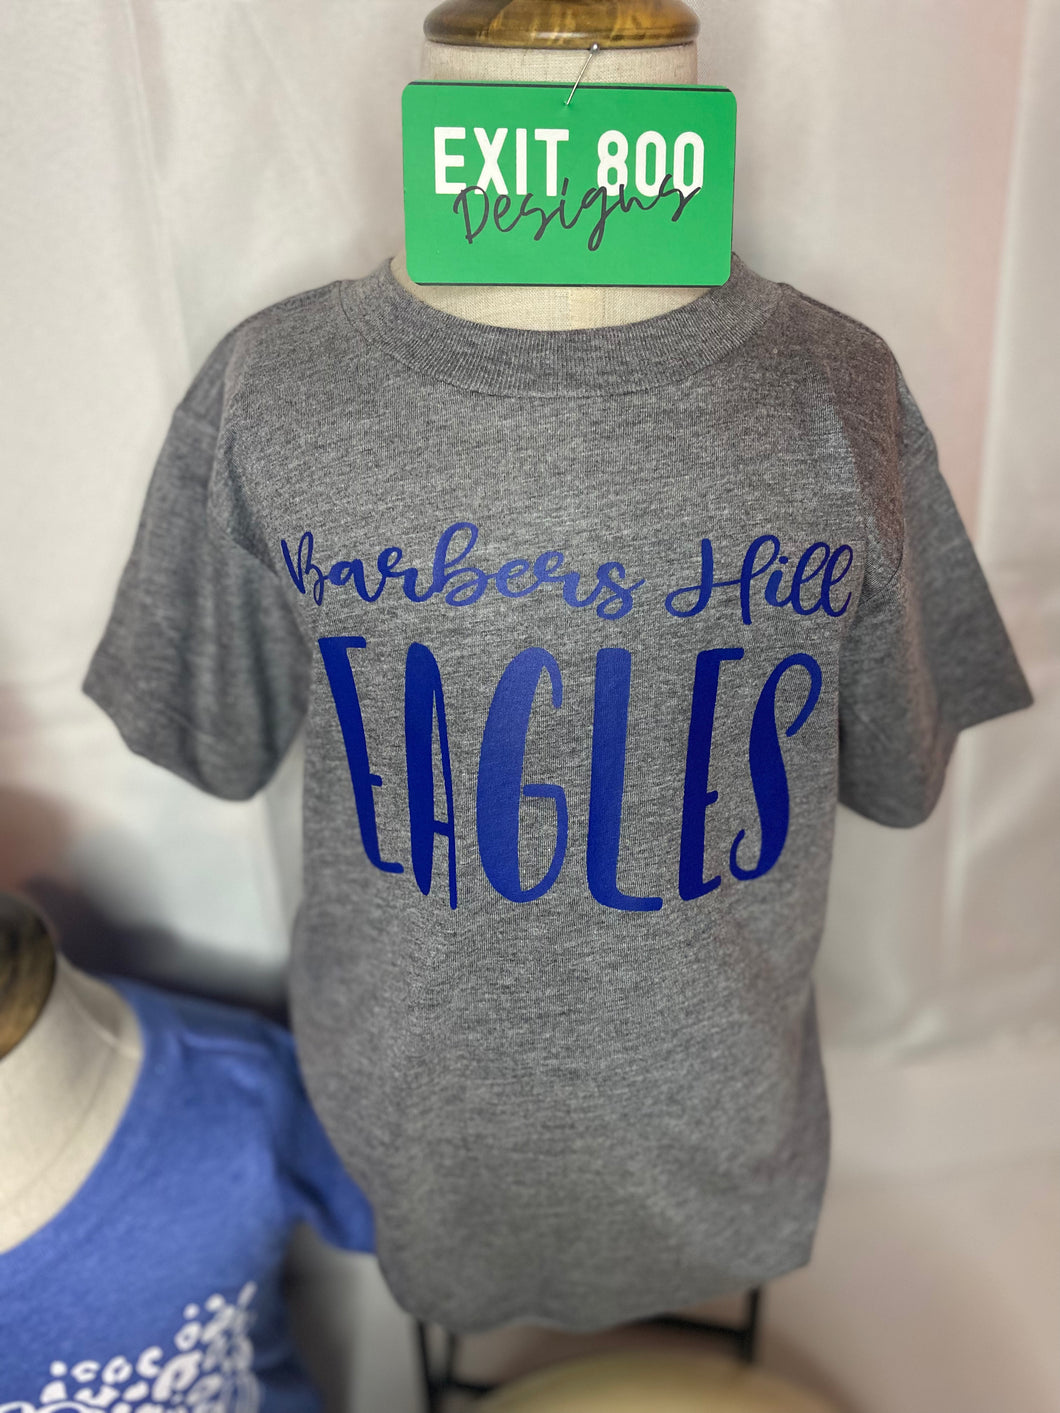 BH Eagles (Baby/Toddler)